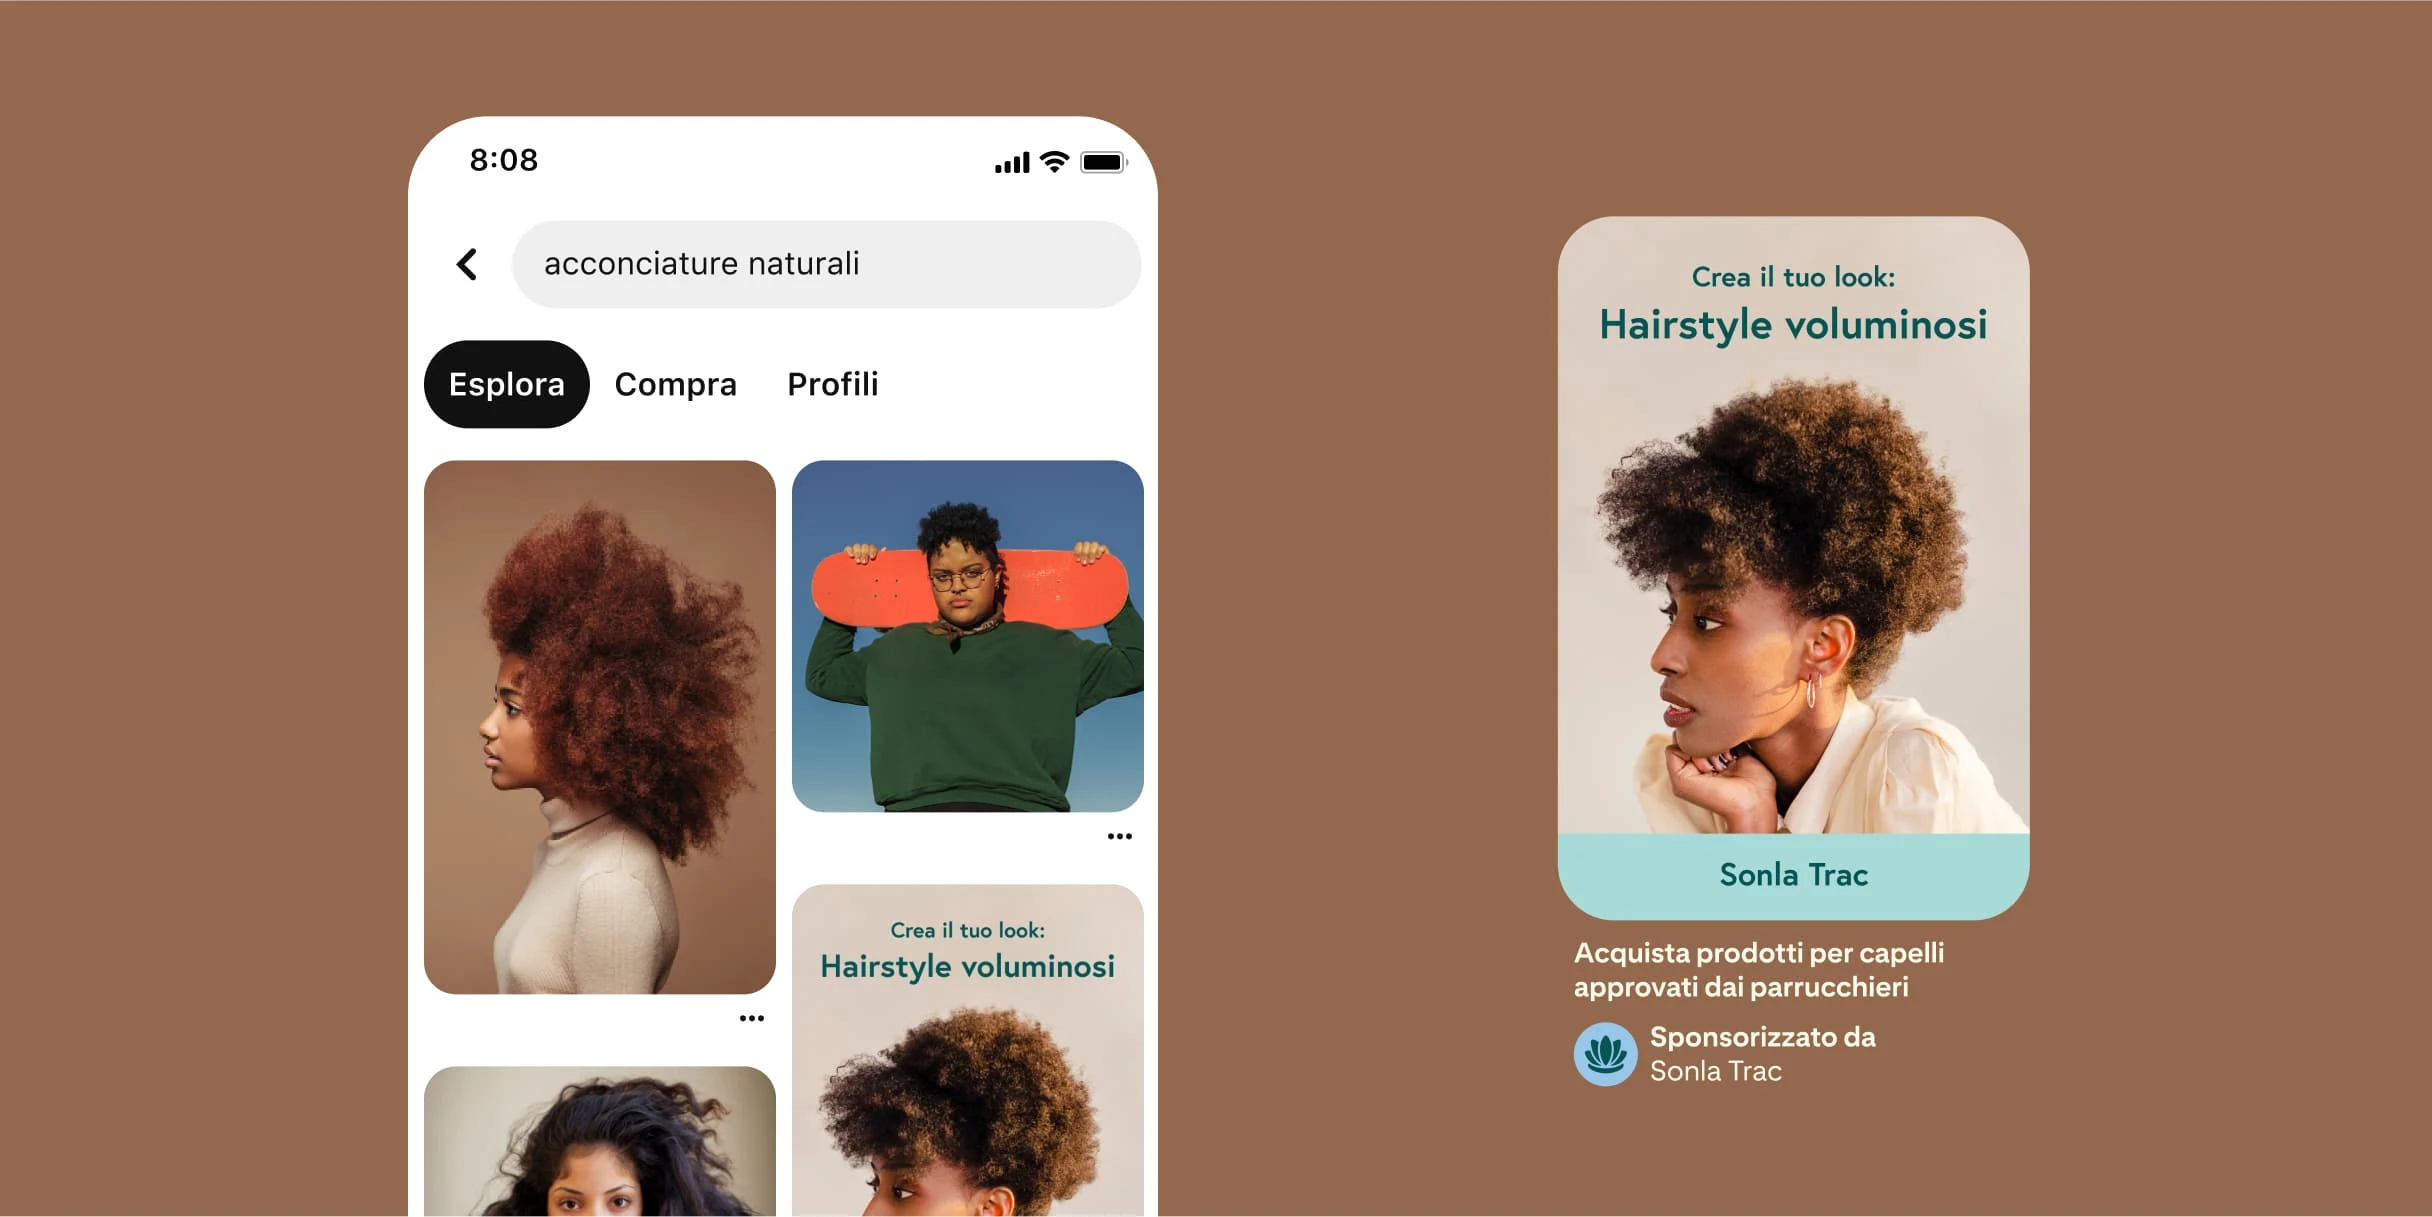 Pinterest search results for natural hairstyles. Black women with different skin tones. Red, black, dark brown and blonde hair. Brown and gray backdrops at left. Woman holds an orange skateboard. Pin of a Black woman with brown natural hairstyle, in front of a brown background. Text reads get the look: high-puff hairstyles, Sonla Trac. Description reads shop salon-approved hair products.
